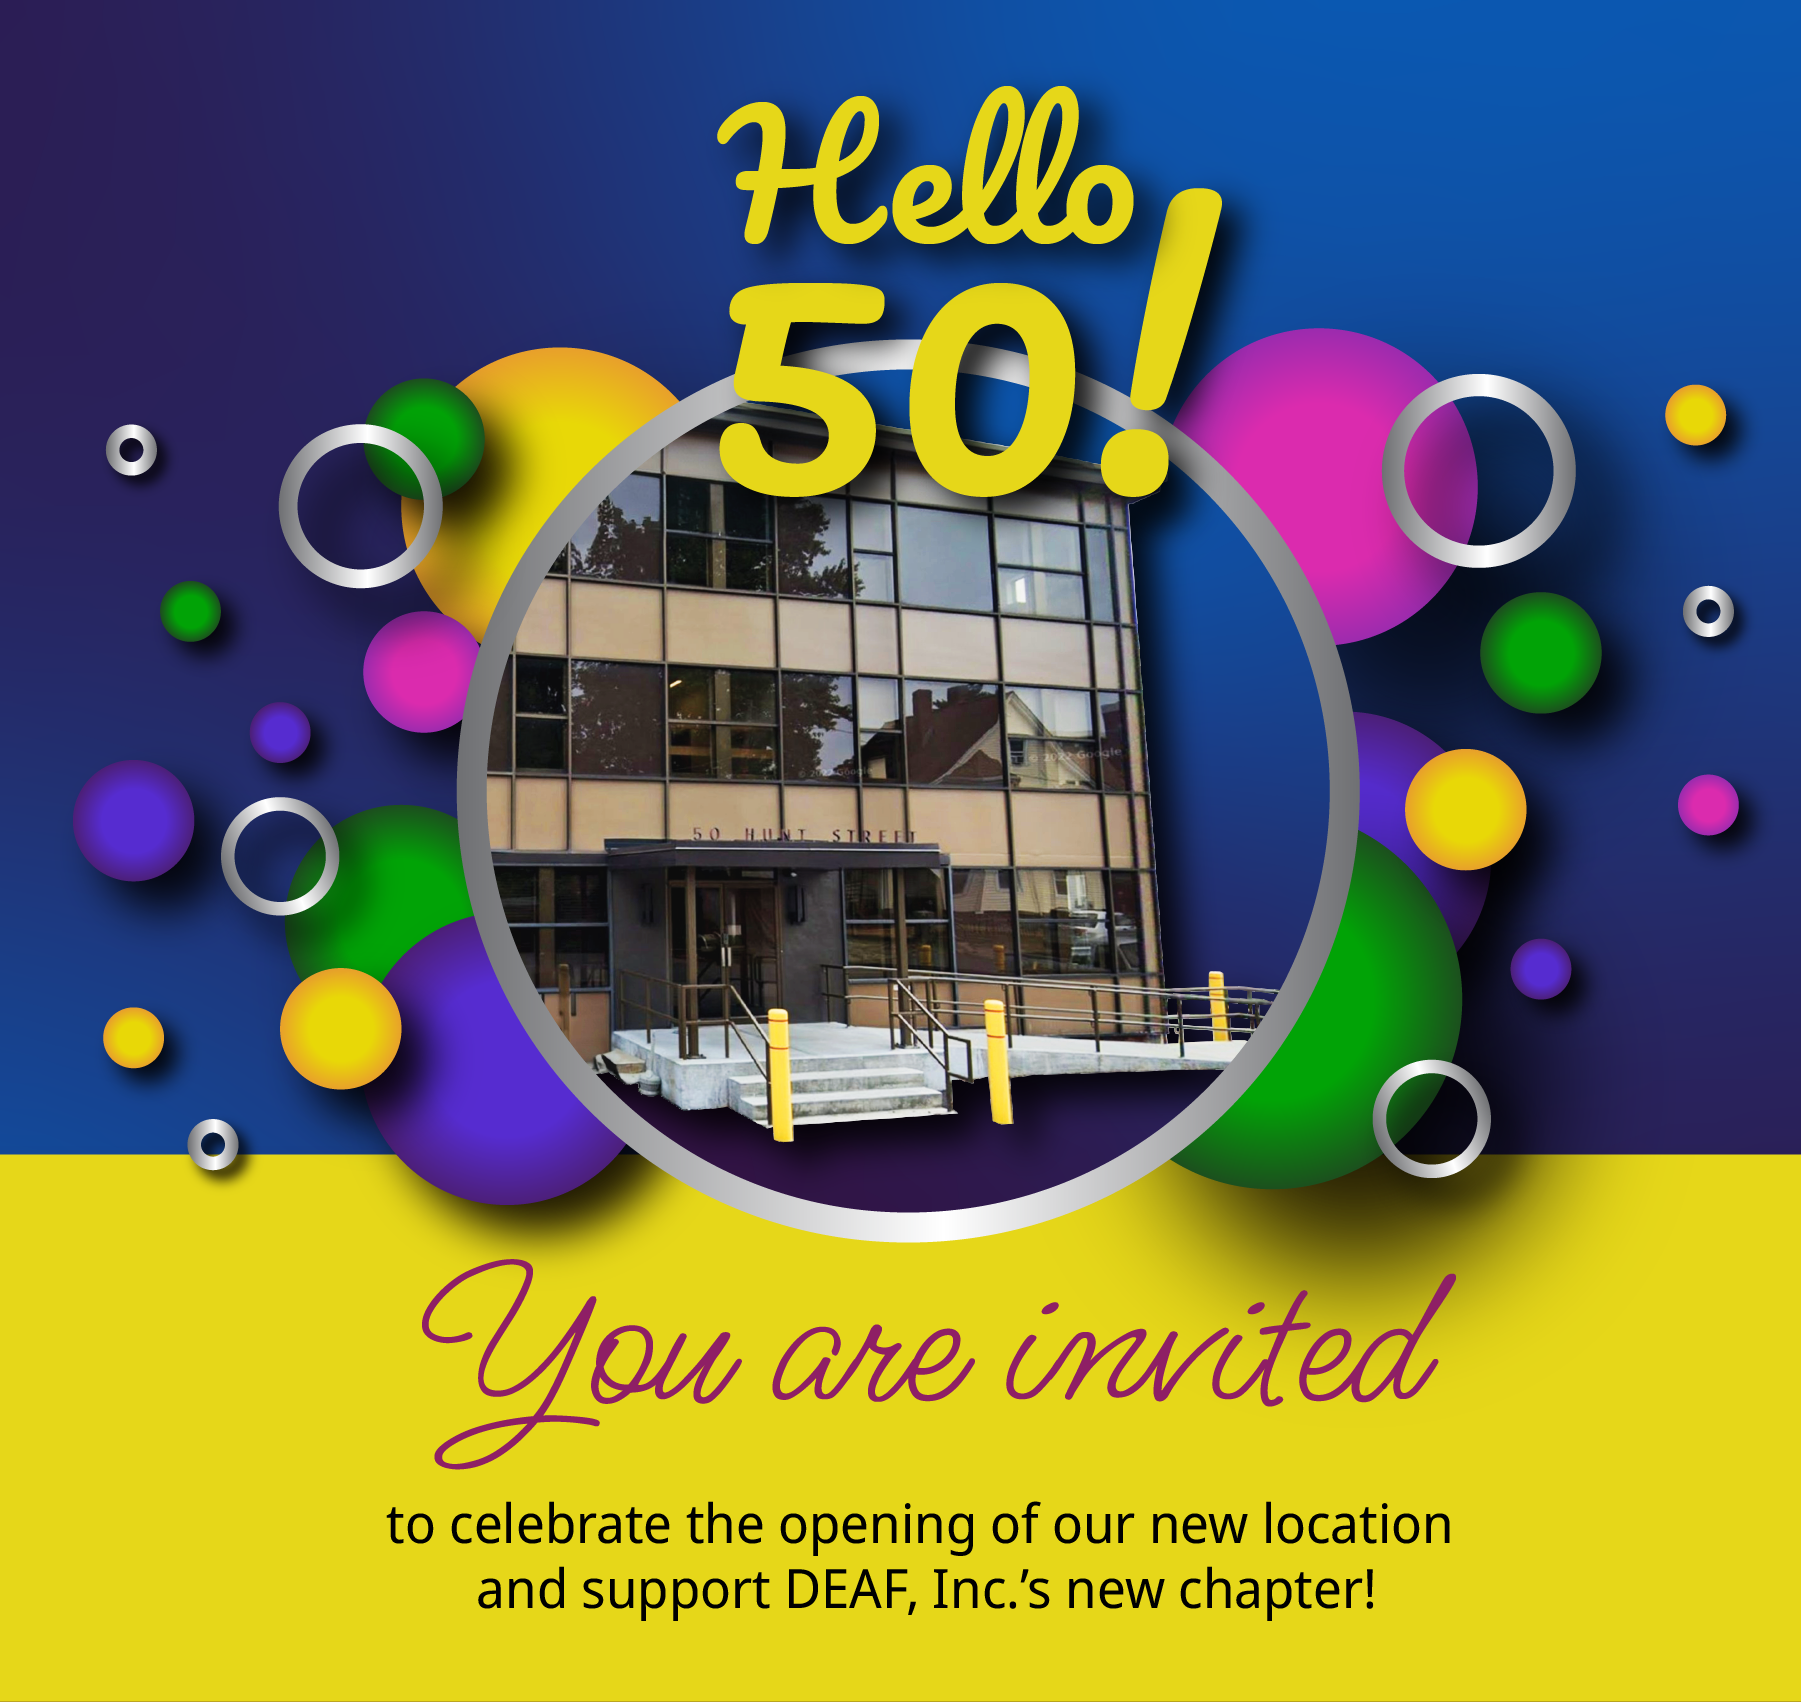 Graphic flyer of a light and dark blue gradient background with “Hello 50!” in fancy yellow text on top of a circular photo in the center of DEAF, Inc.’s new office building. Behind that are multiple full and outlined gradient circles in grey, yellow, purple, green, and pink surrounding the photo and title. In the center there is a bold yellow bar with “You are invited!” in a pink cursive font with “to celebrate the opening of our new location and support DEAF, Inc.’s new chapter!” below it. At the bottom is a light and dark pink gradient section with “September 14, 2023 5:00 - 7:00 pm 50 Hunt Street, Suite 200, Watertown, MA 02472" on the left. Thin yellow divider line is in the middle. “Appetizers will be served” is on the right with a yellow outlined rounded box below “RSVP” with a white QR code next to it.